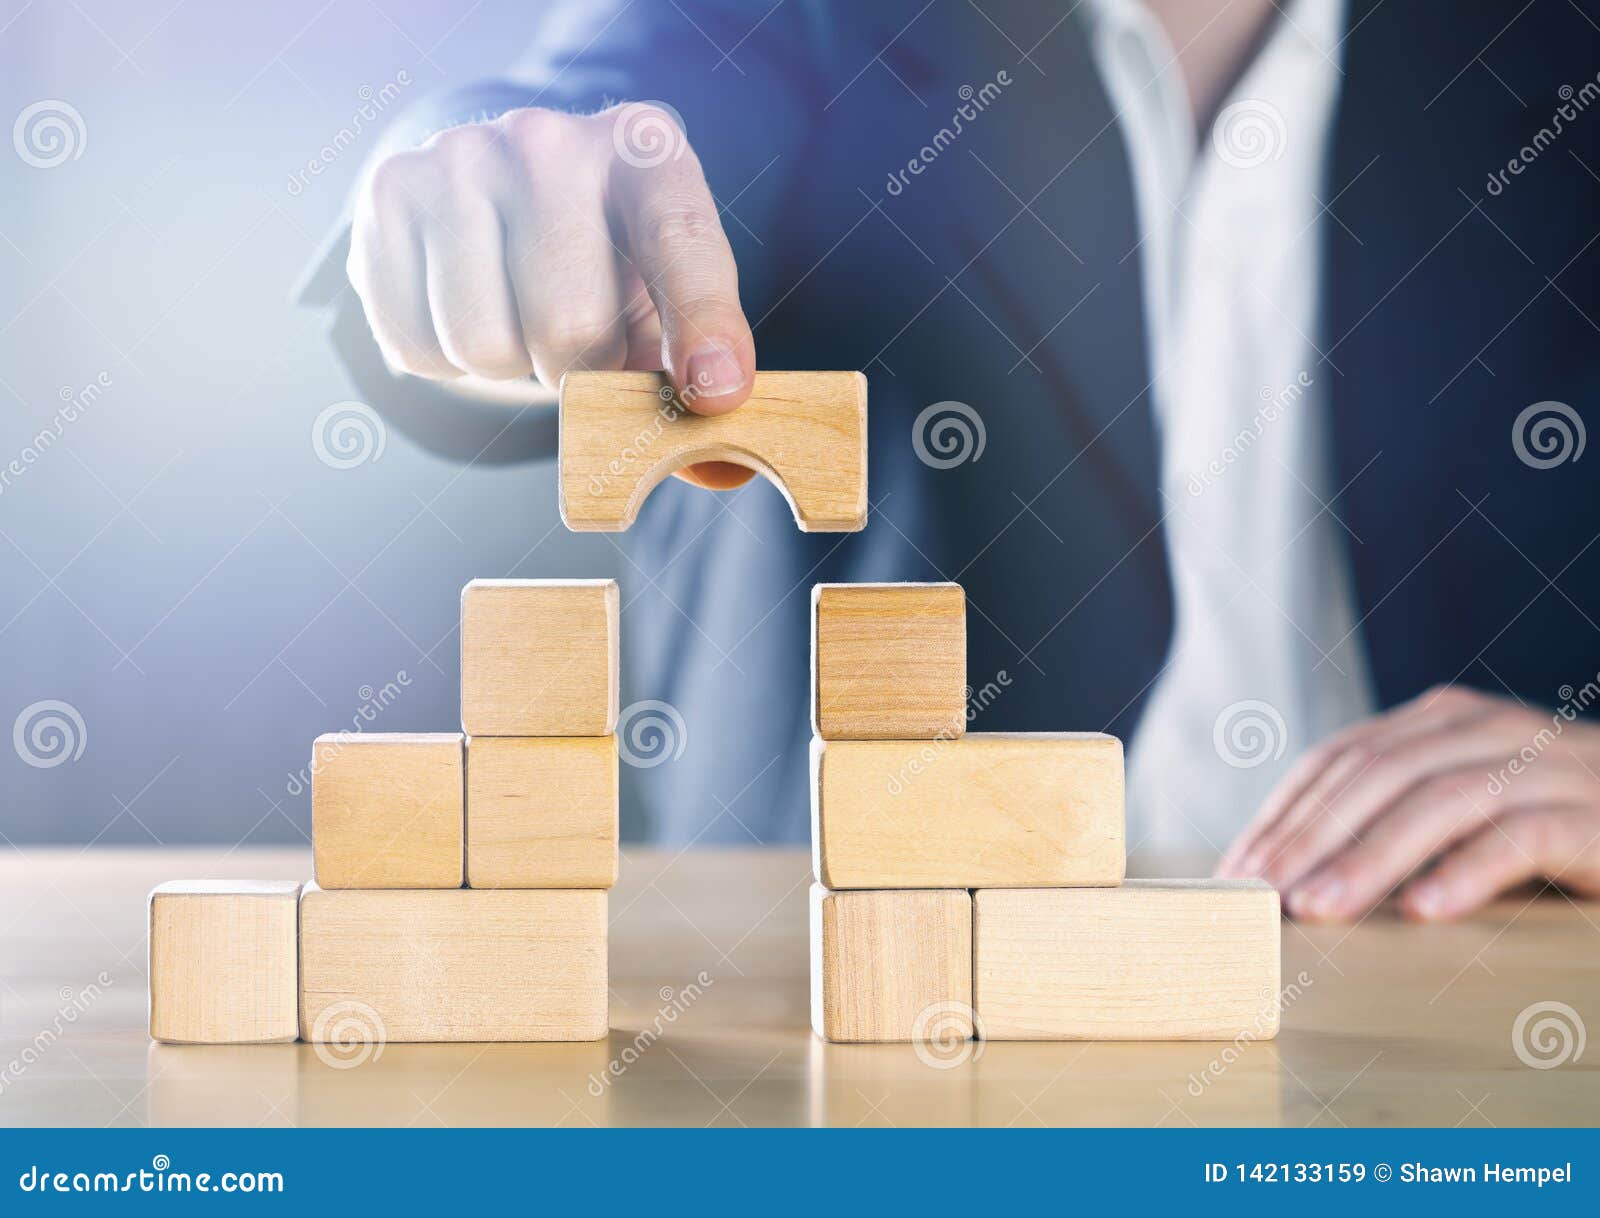 business man bridging the gap between two towers or parties made from wooden blocks; conflict management or mediator concept